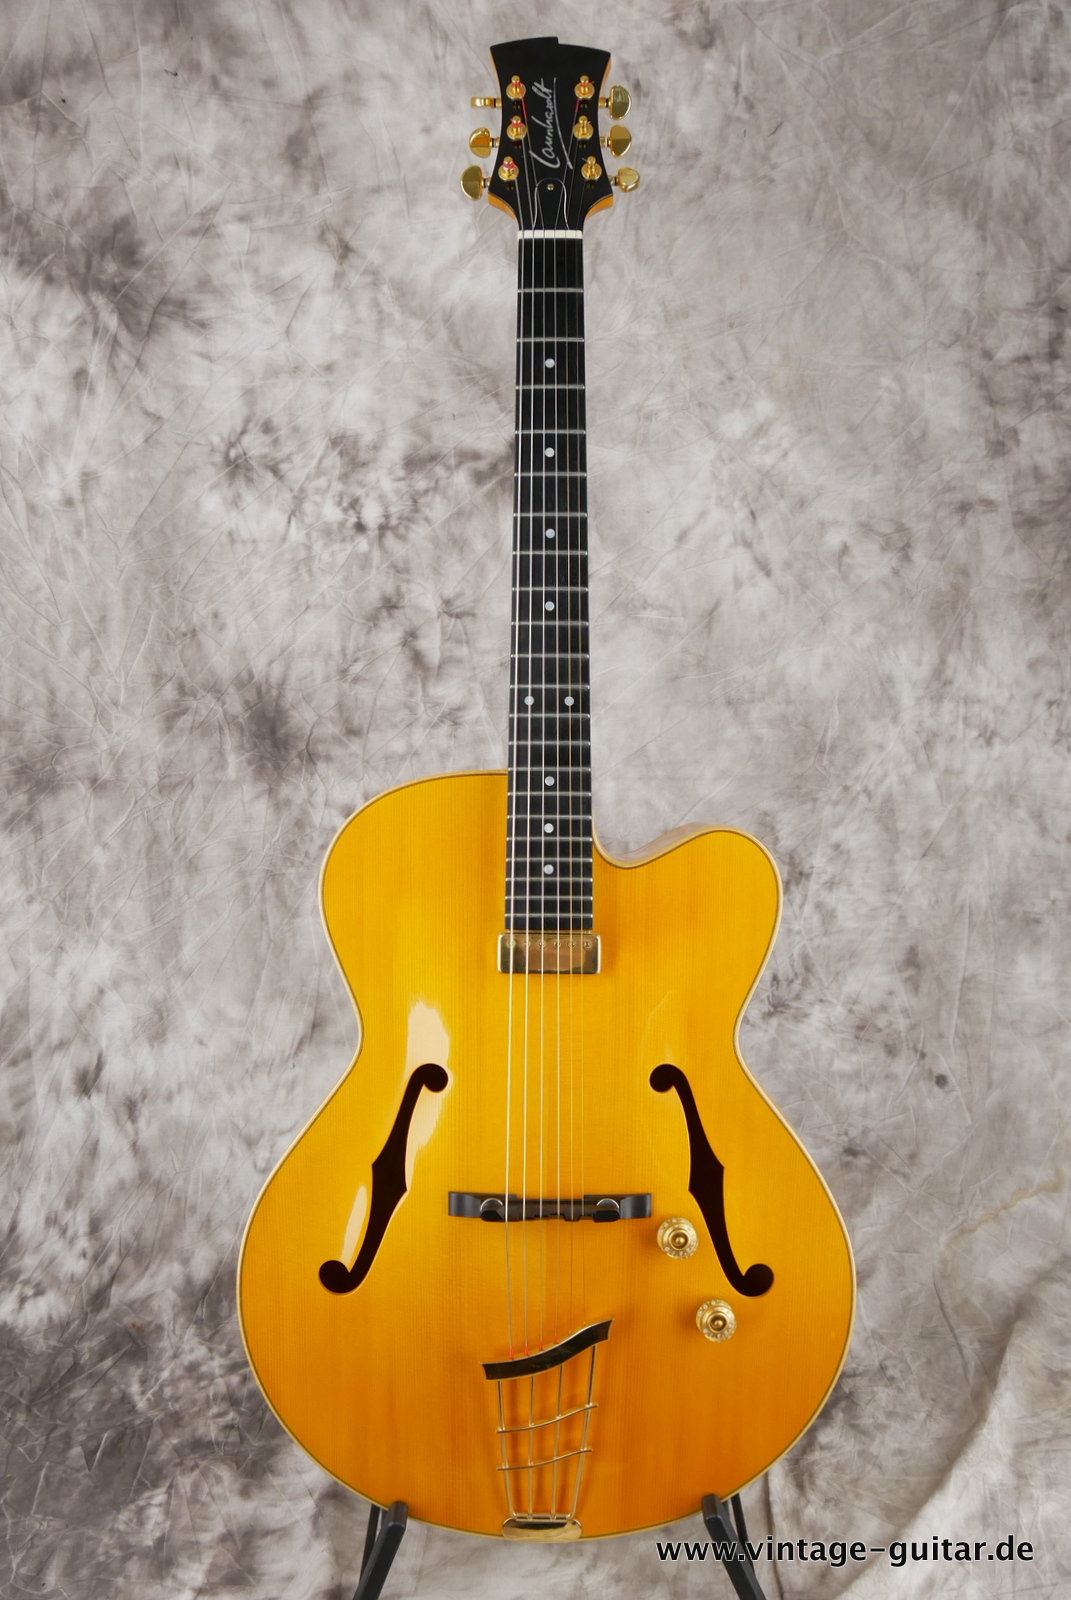 Launhardt_Fs3_german_guitar_archtop_all_solid-001.JPG